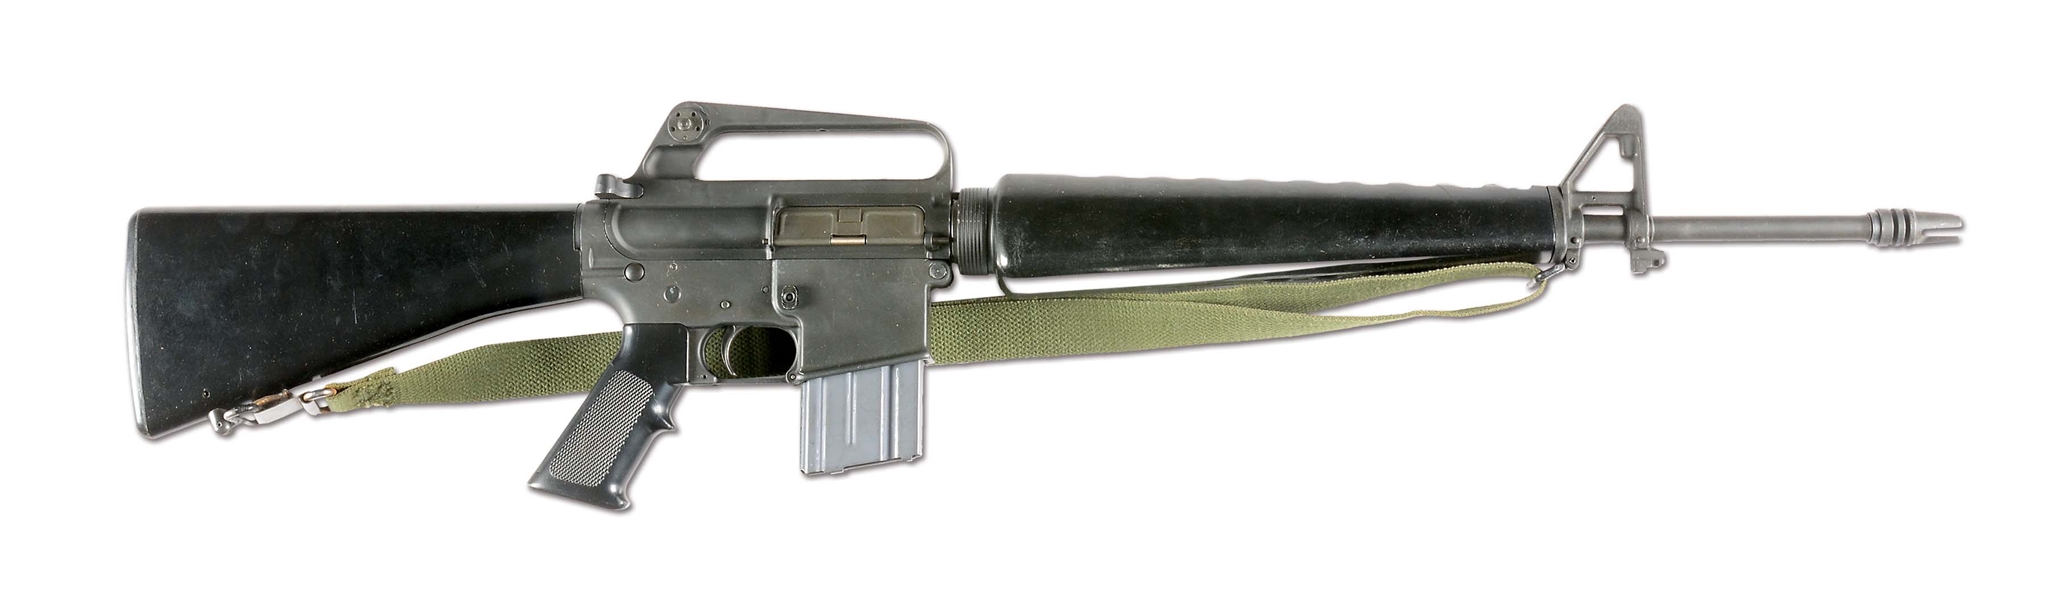 (N) DESIRABLE HIGH CONDITION EARLY COLT AR-15 CONVERTED TO M16 MACHINE GUN BY PEARL MANUFACTURING (FULLY TRANSFERABLE).